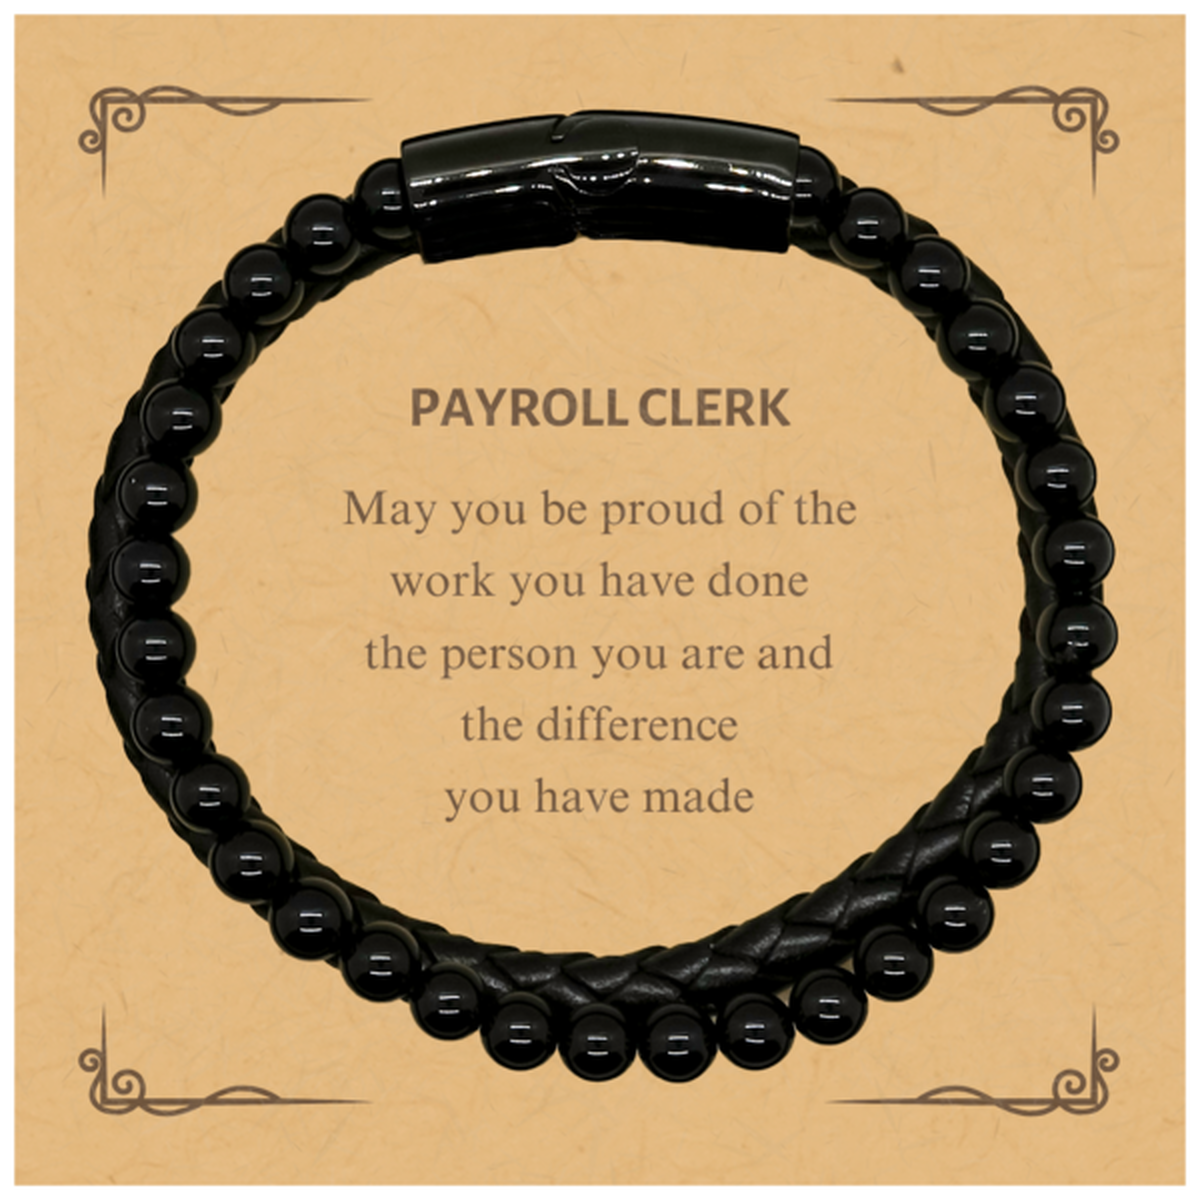 Payroll Clerk May you be proud of the work you have done, Retirement Payroll Clerk Stone Leather Bracelets for Colleague Appreciation Gifts Amazing for Payroll Clerk